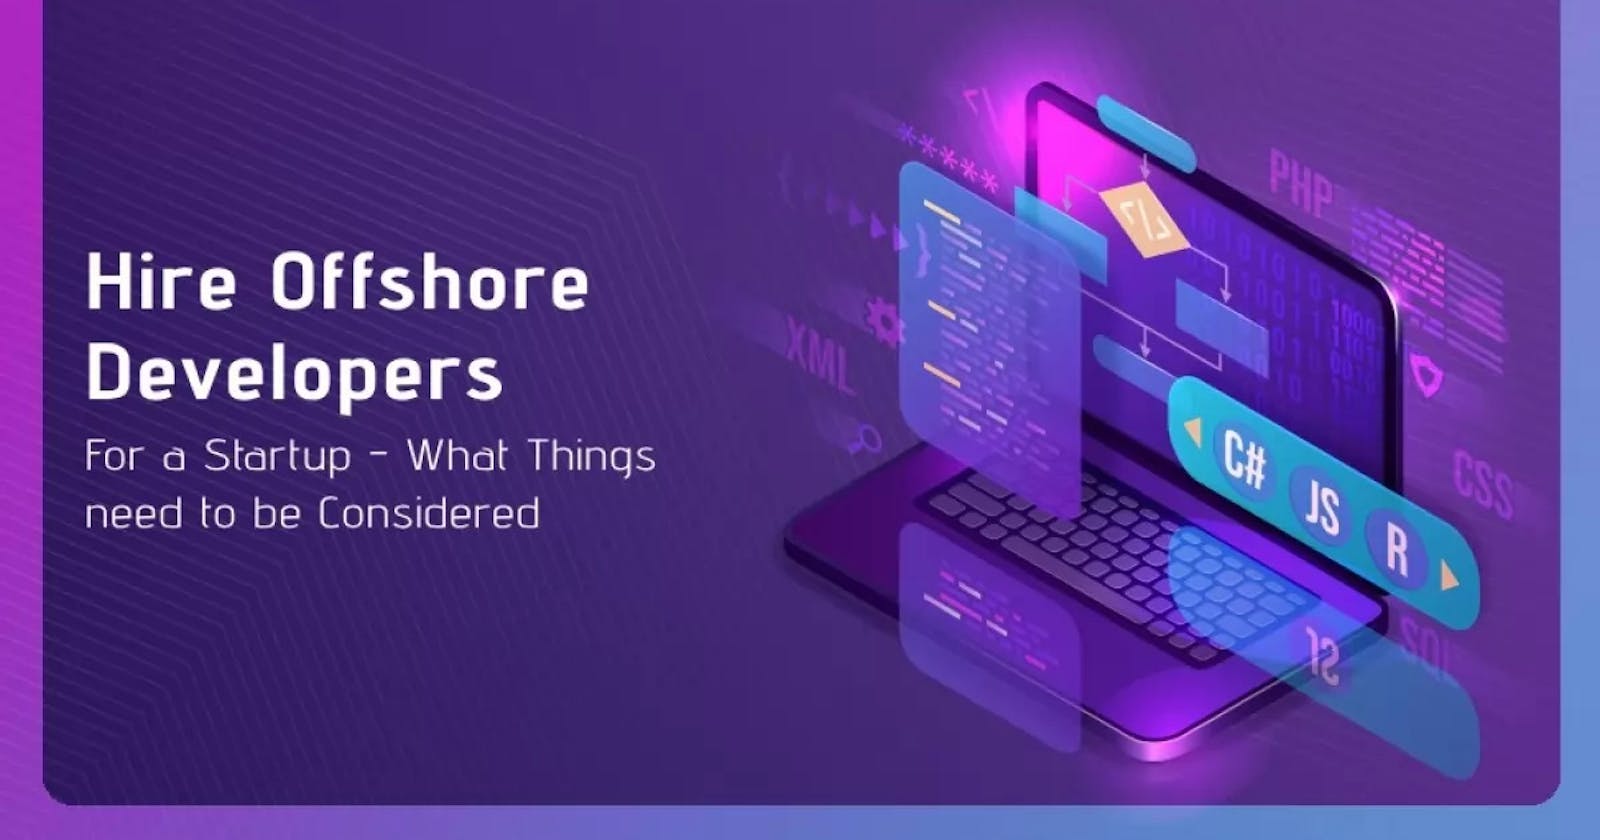 Hire Offshore Developers For A Startup - What Things Need To Be Considered